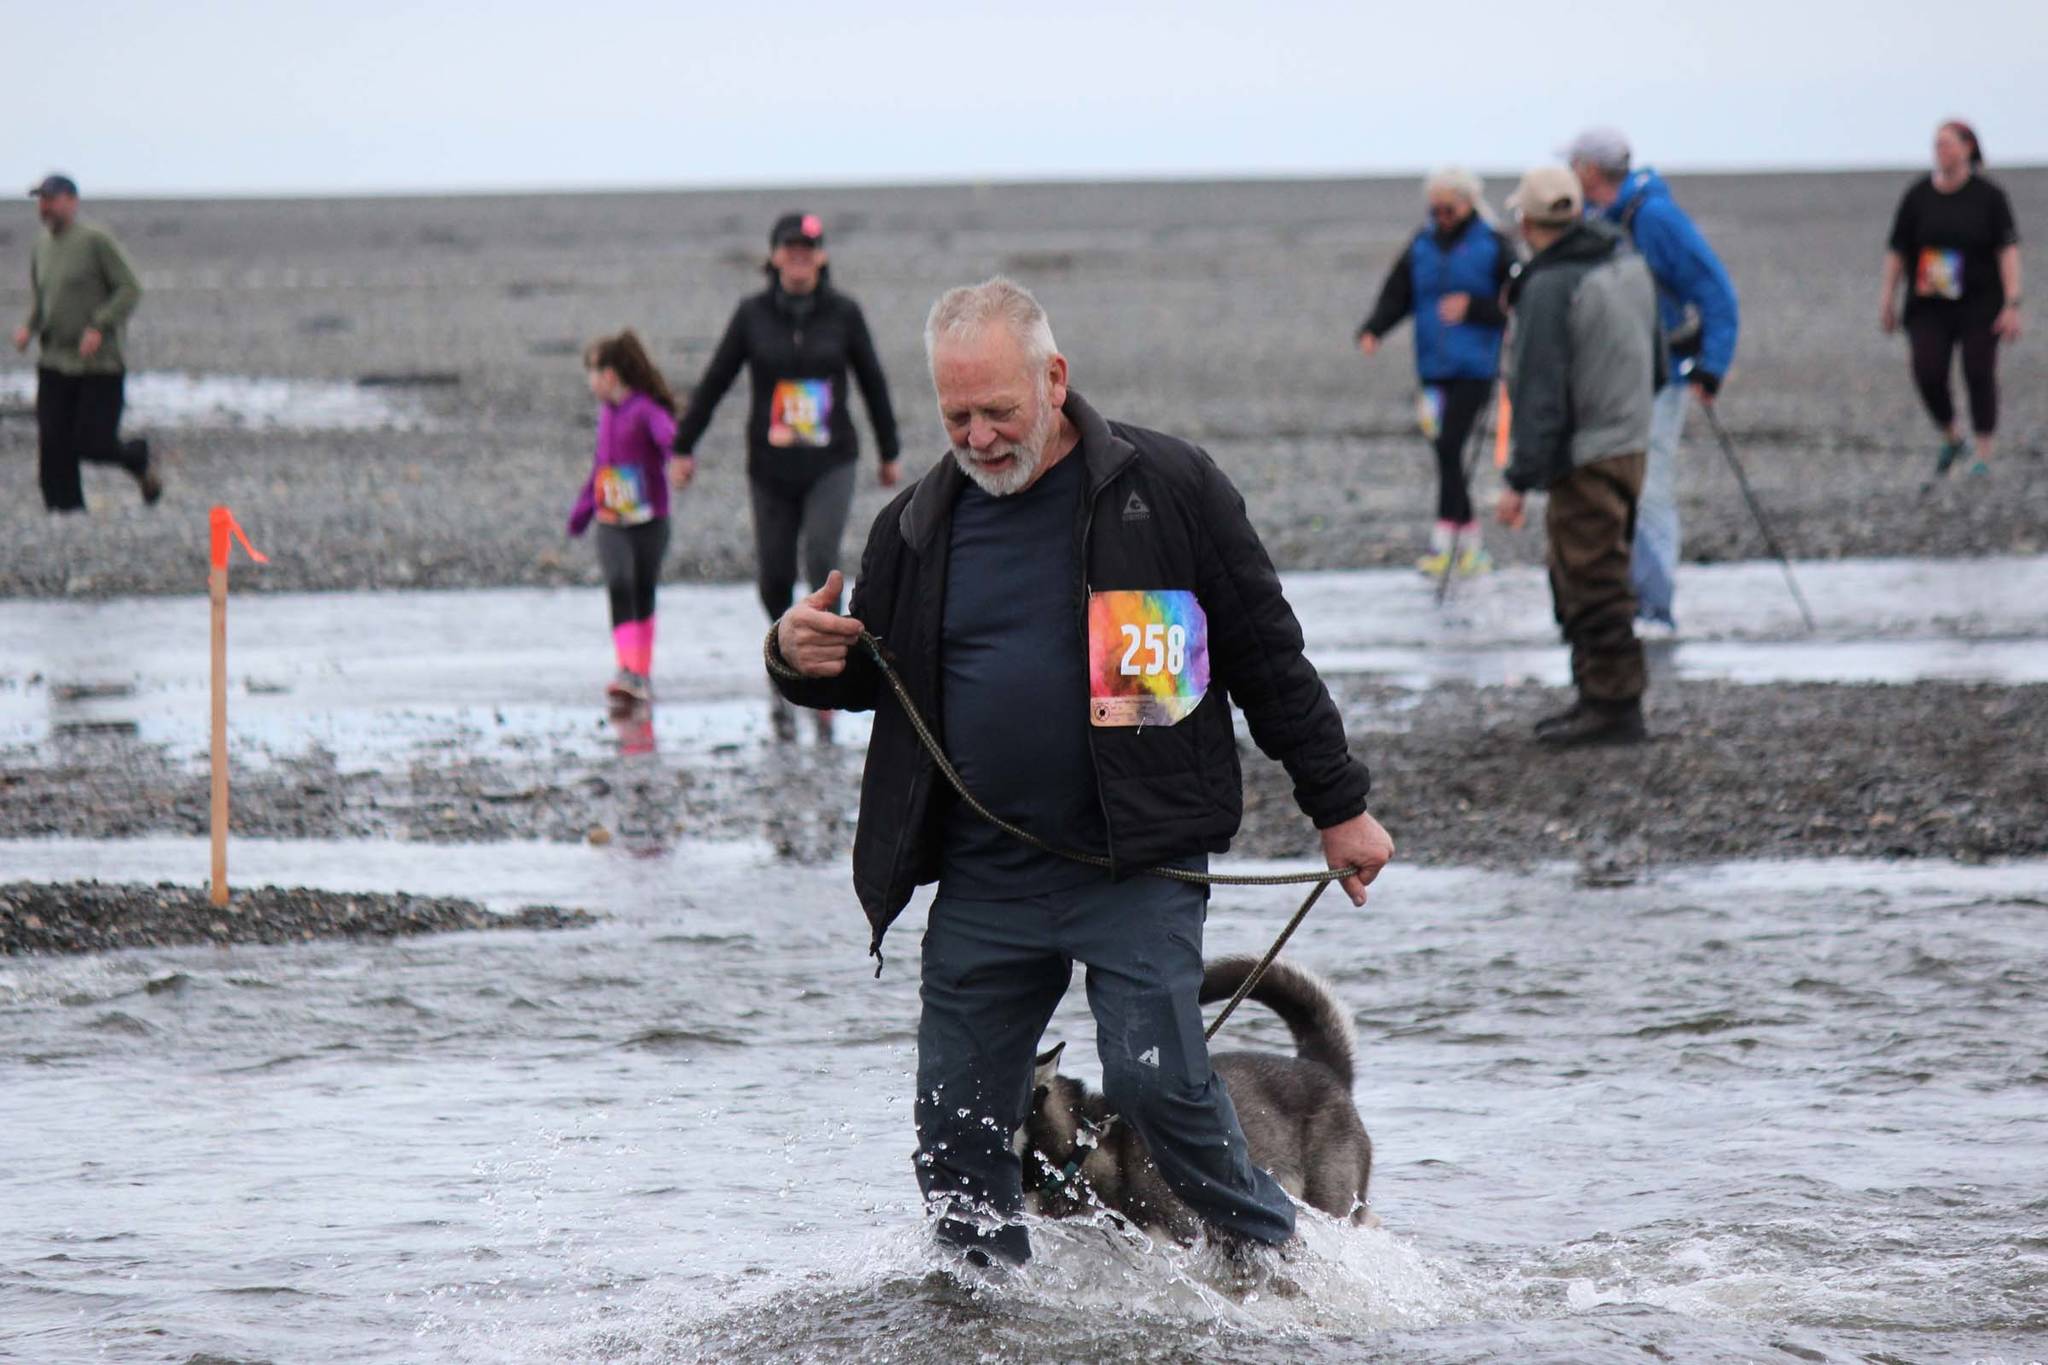 Tom Farrell and his canine running partner, Kiladai, cross the mouth of Deep Creek. Farrell, 80, was the oldest participate in 2019 Clam Scramble, a 5K fun run held on Saturday, June 15, 2019 in Ninilchik, Alaska. (Photo by McKibben Jackinsky)